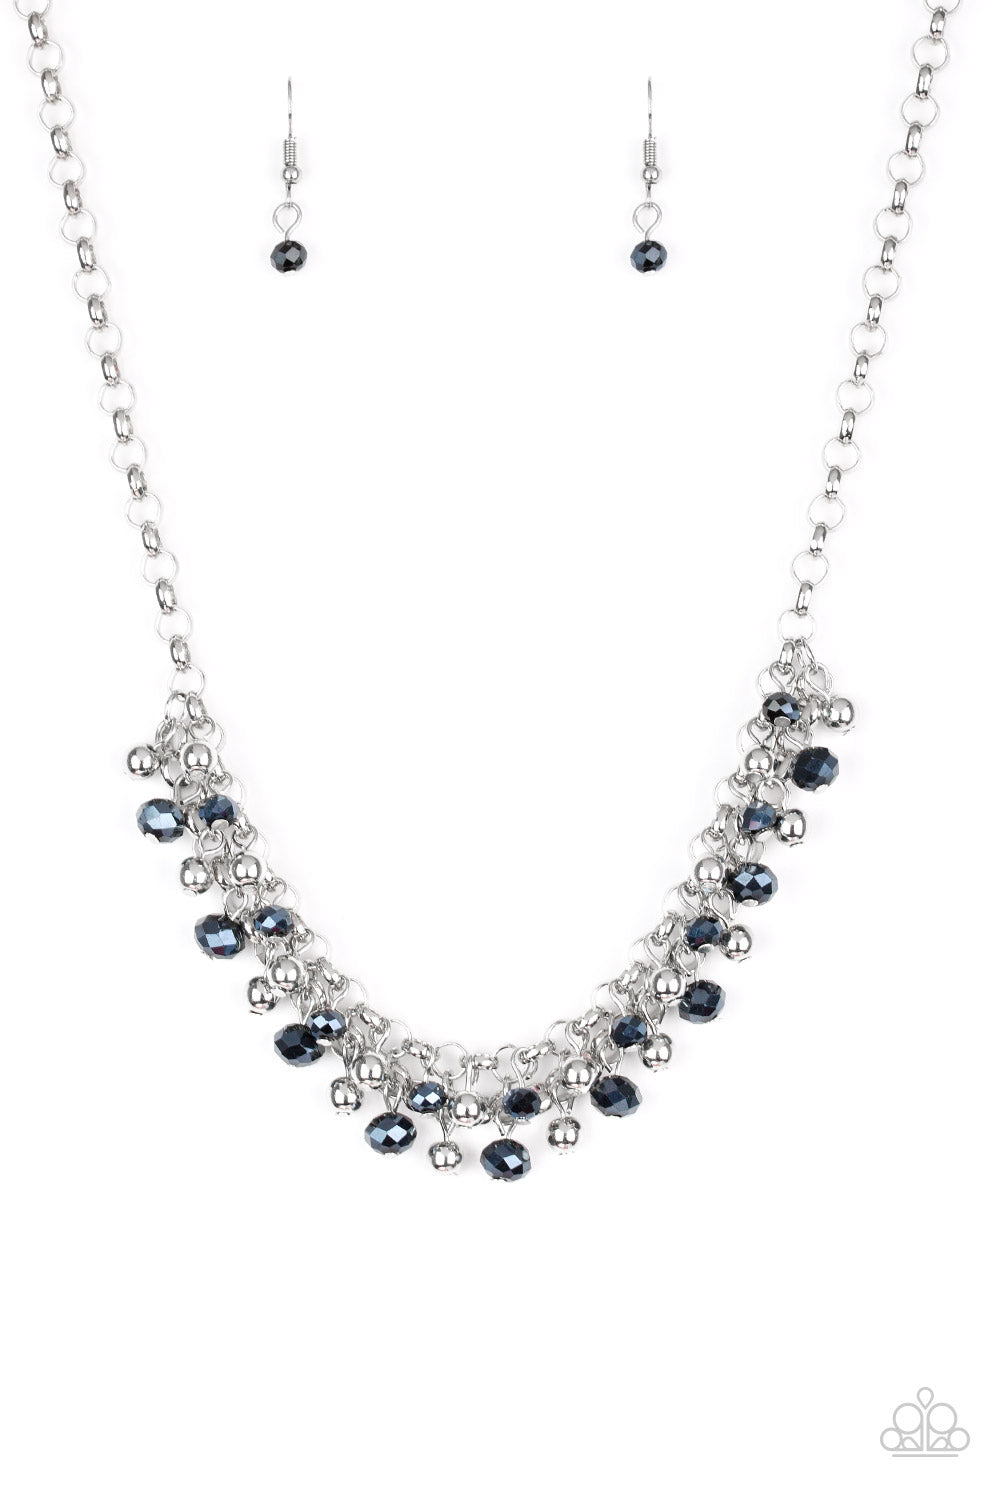 Trust Fund Baby Blue Necklace - Paparazzi Accessories